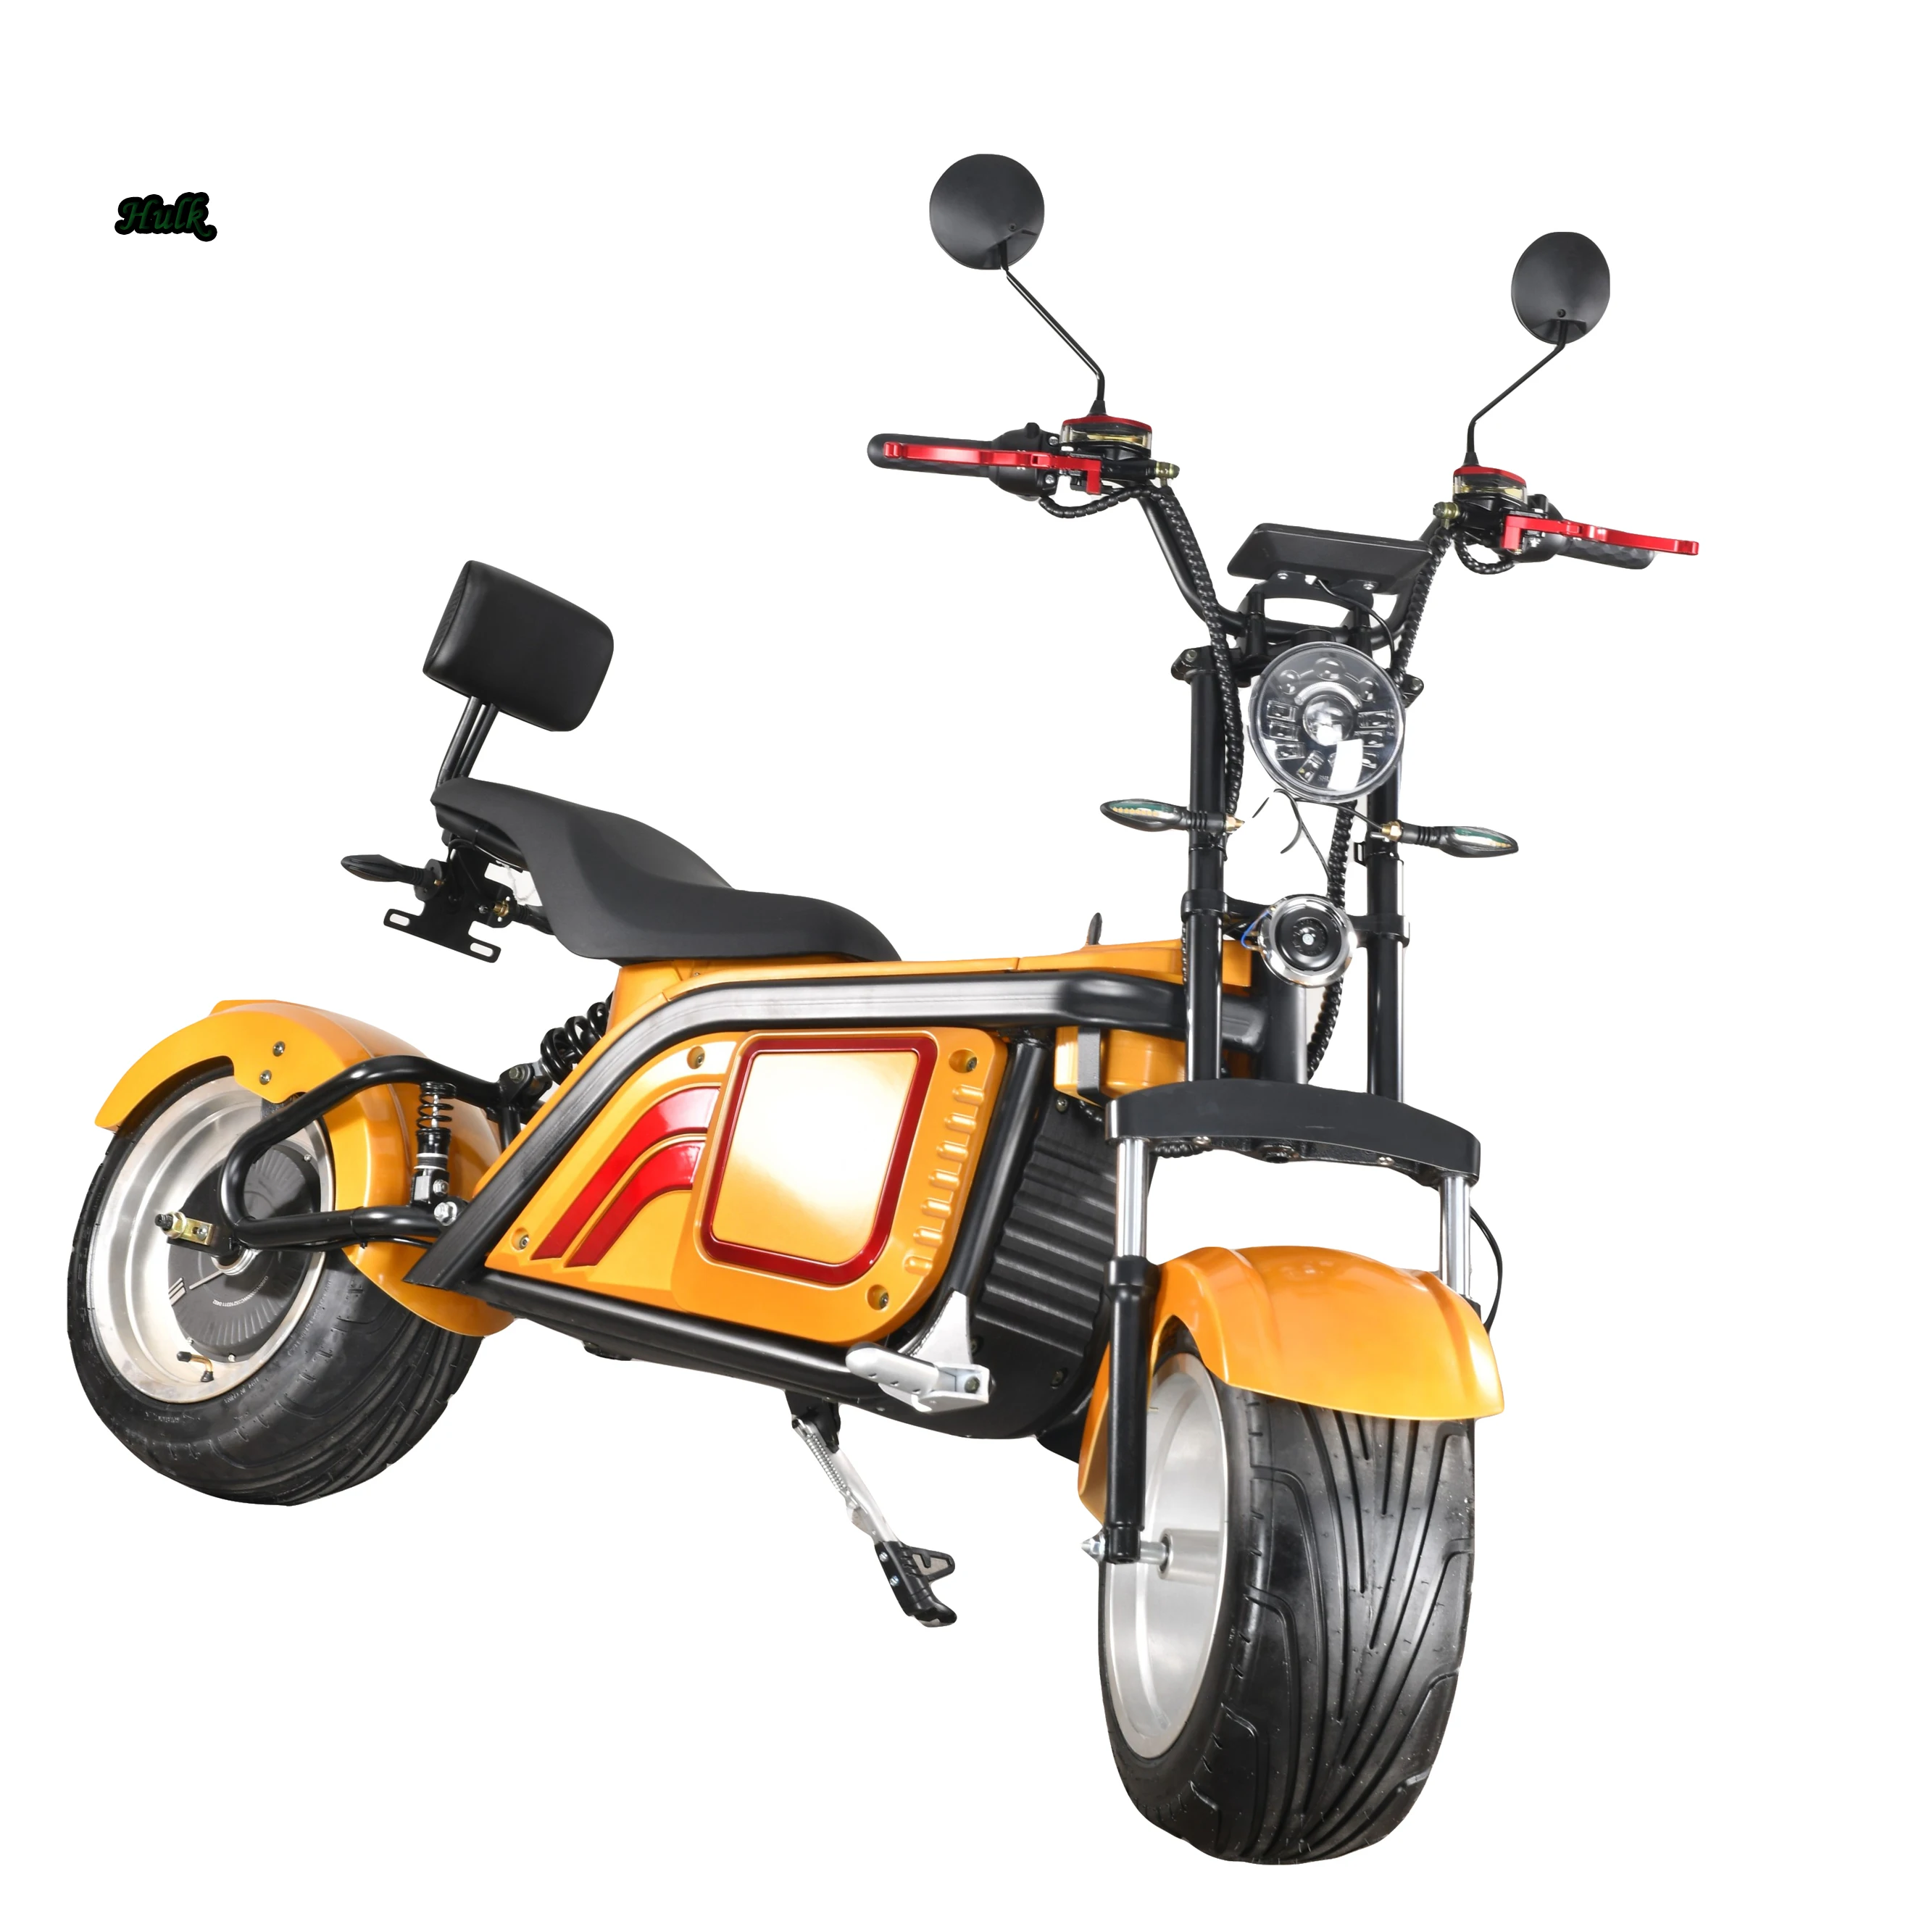 

3000W Electric Scooter EEC / COC Certificate Wild Racing Electric Motorcycle Citycoco Cool Swift